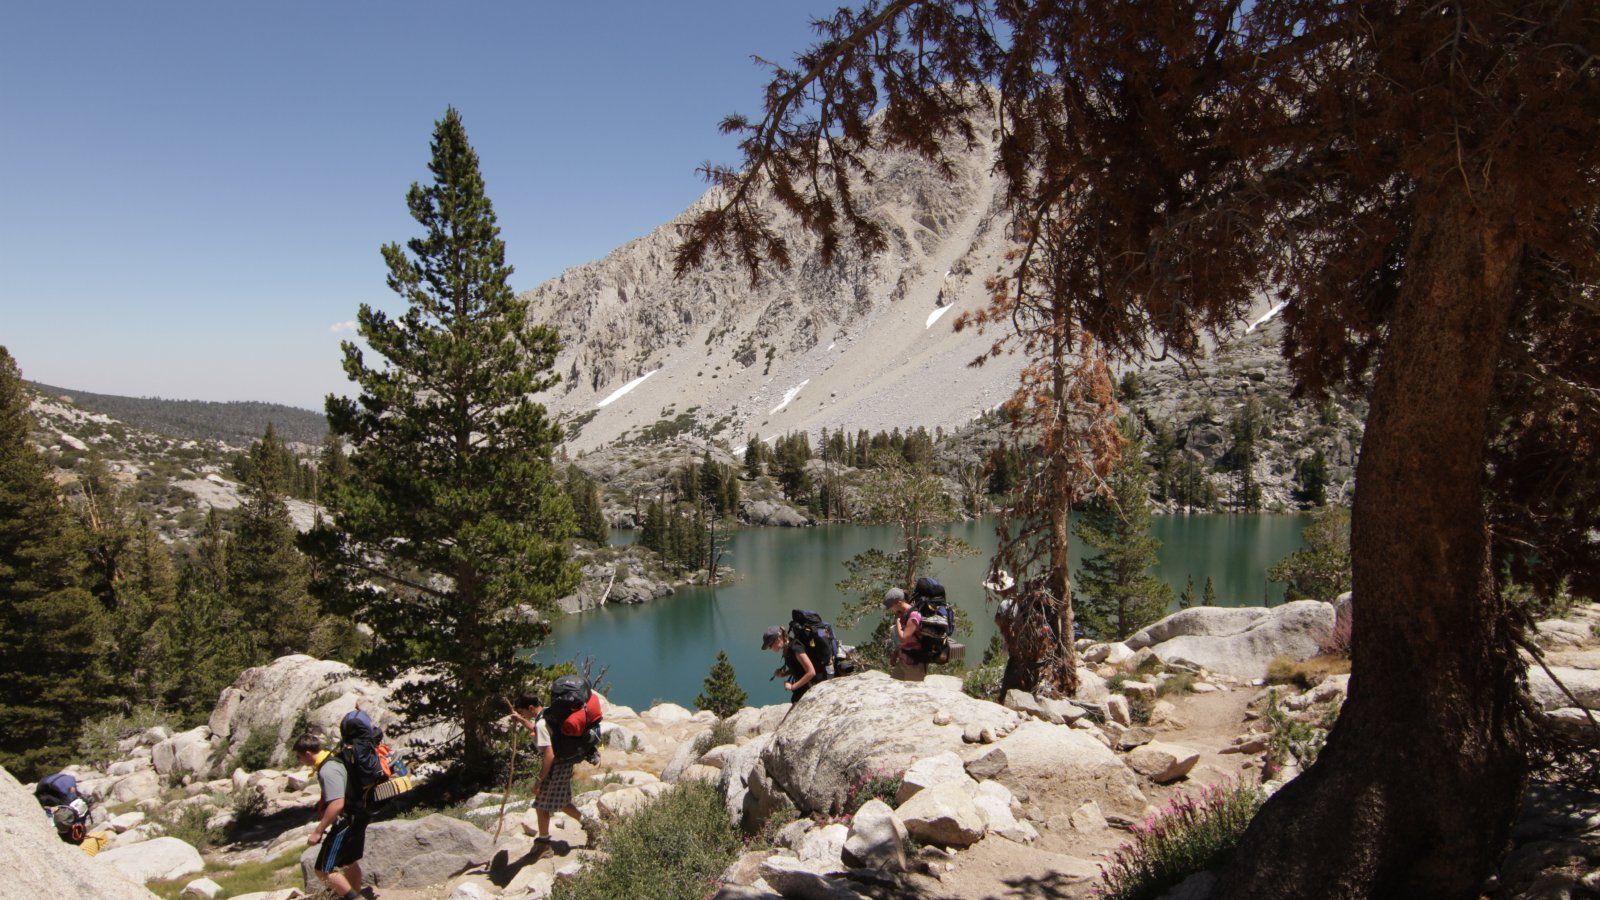 Students hike next to a lake